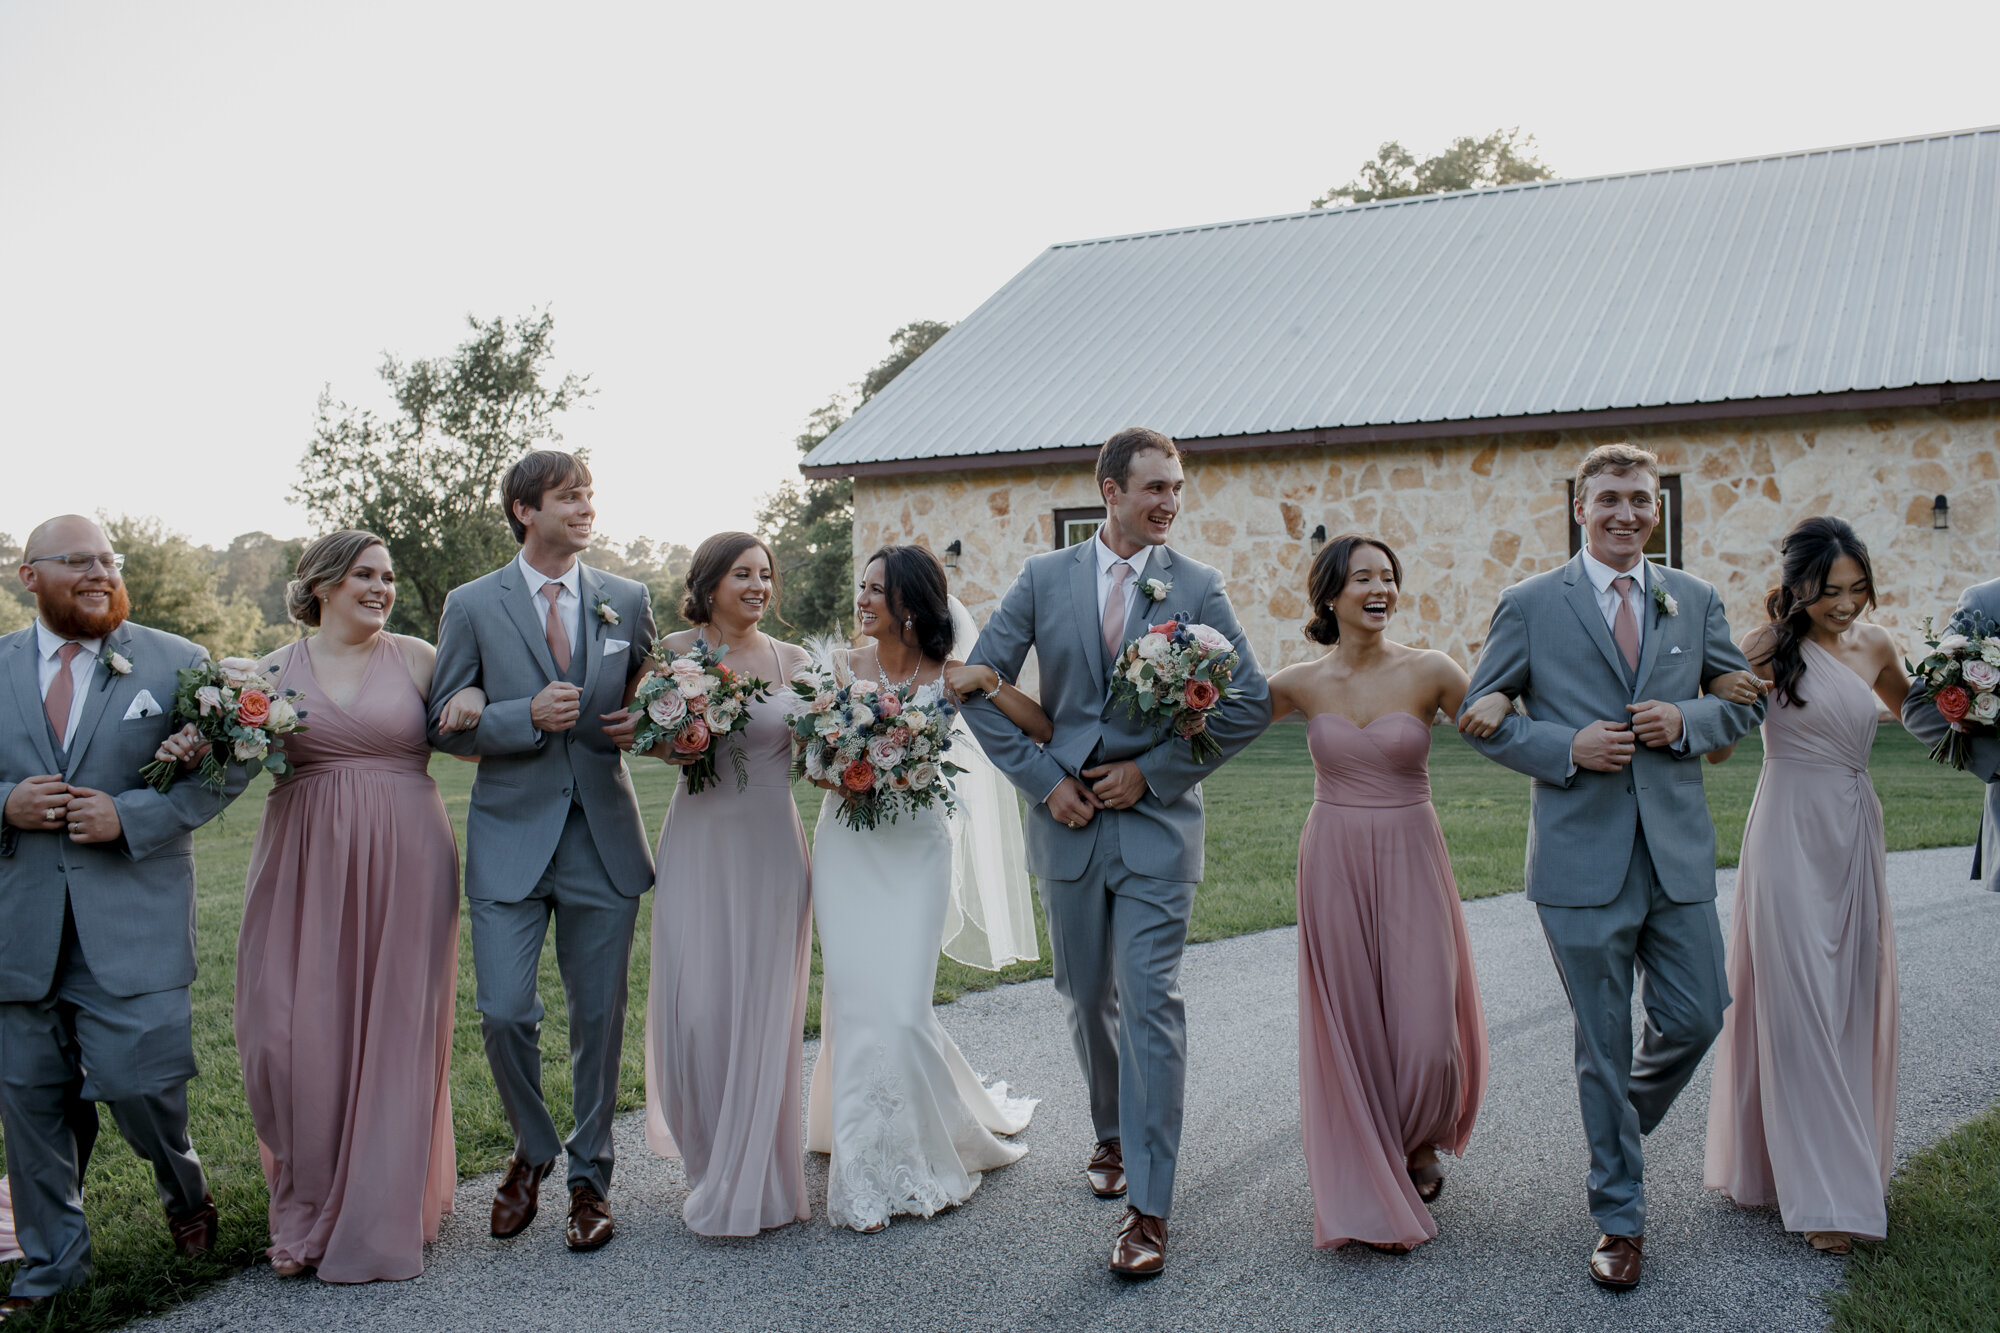 Bride and groom walking with bridal party. Romantic Chic Country Wedding at Rustic Luxury Balmorhea Events&nbsp;Venue in Magnolia, TX